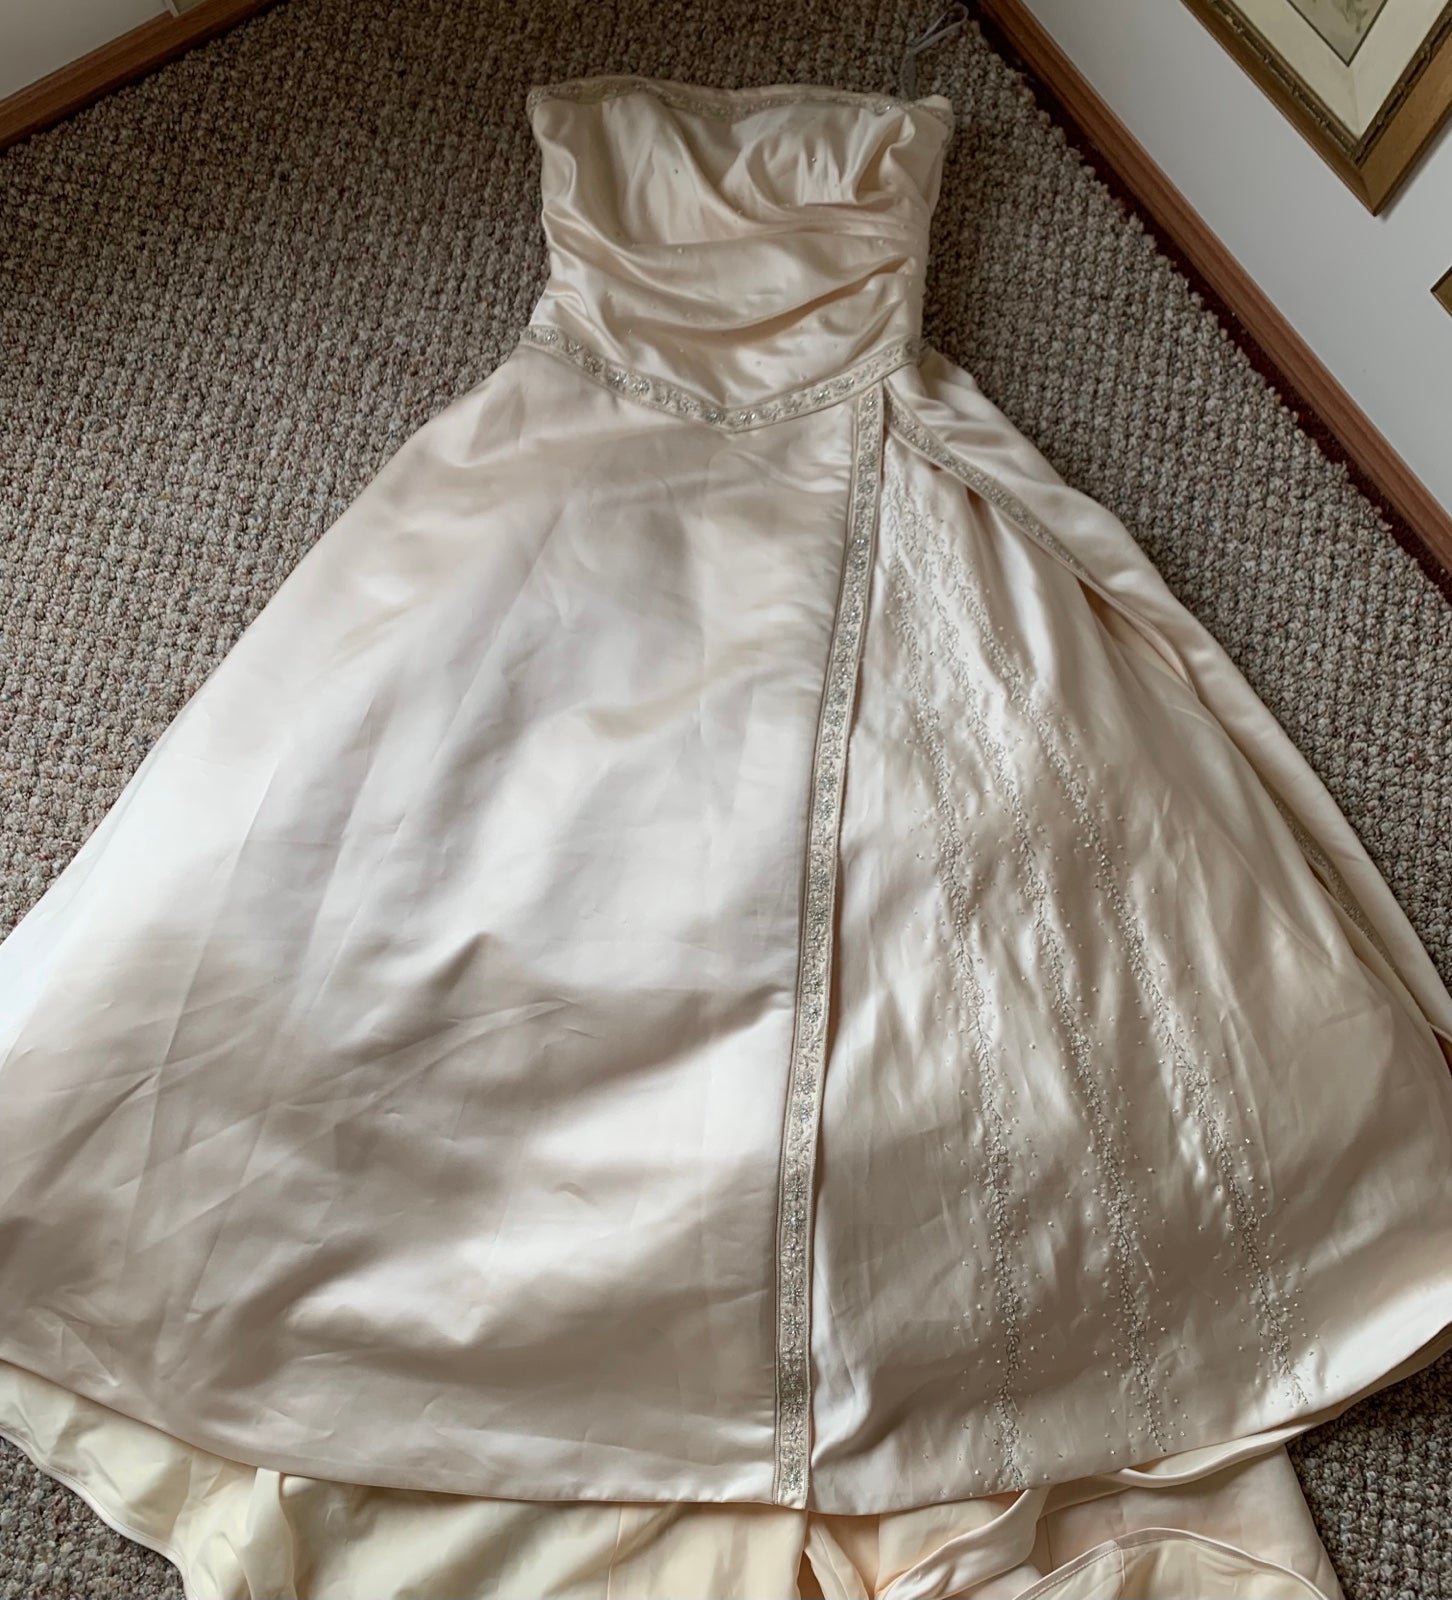 Discounted NWT gold strapless wedding dress k7p8Uf1HE online store